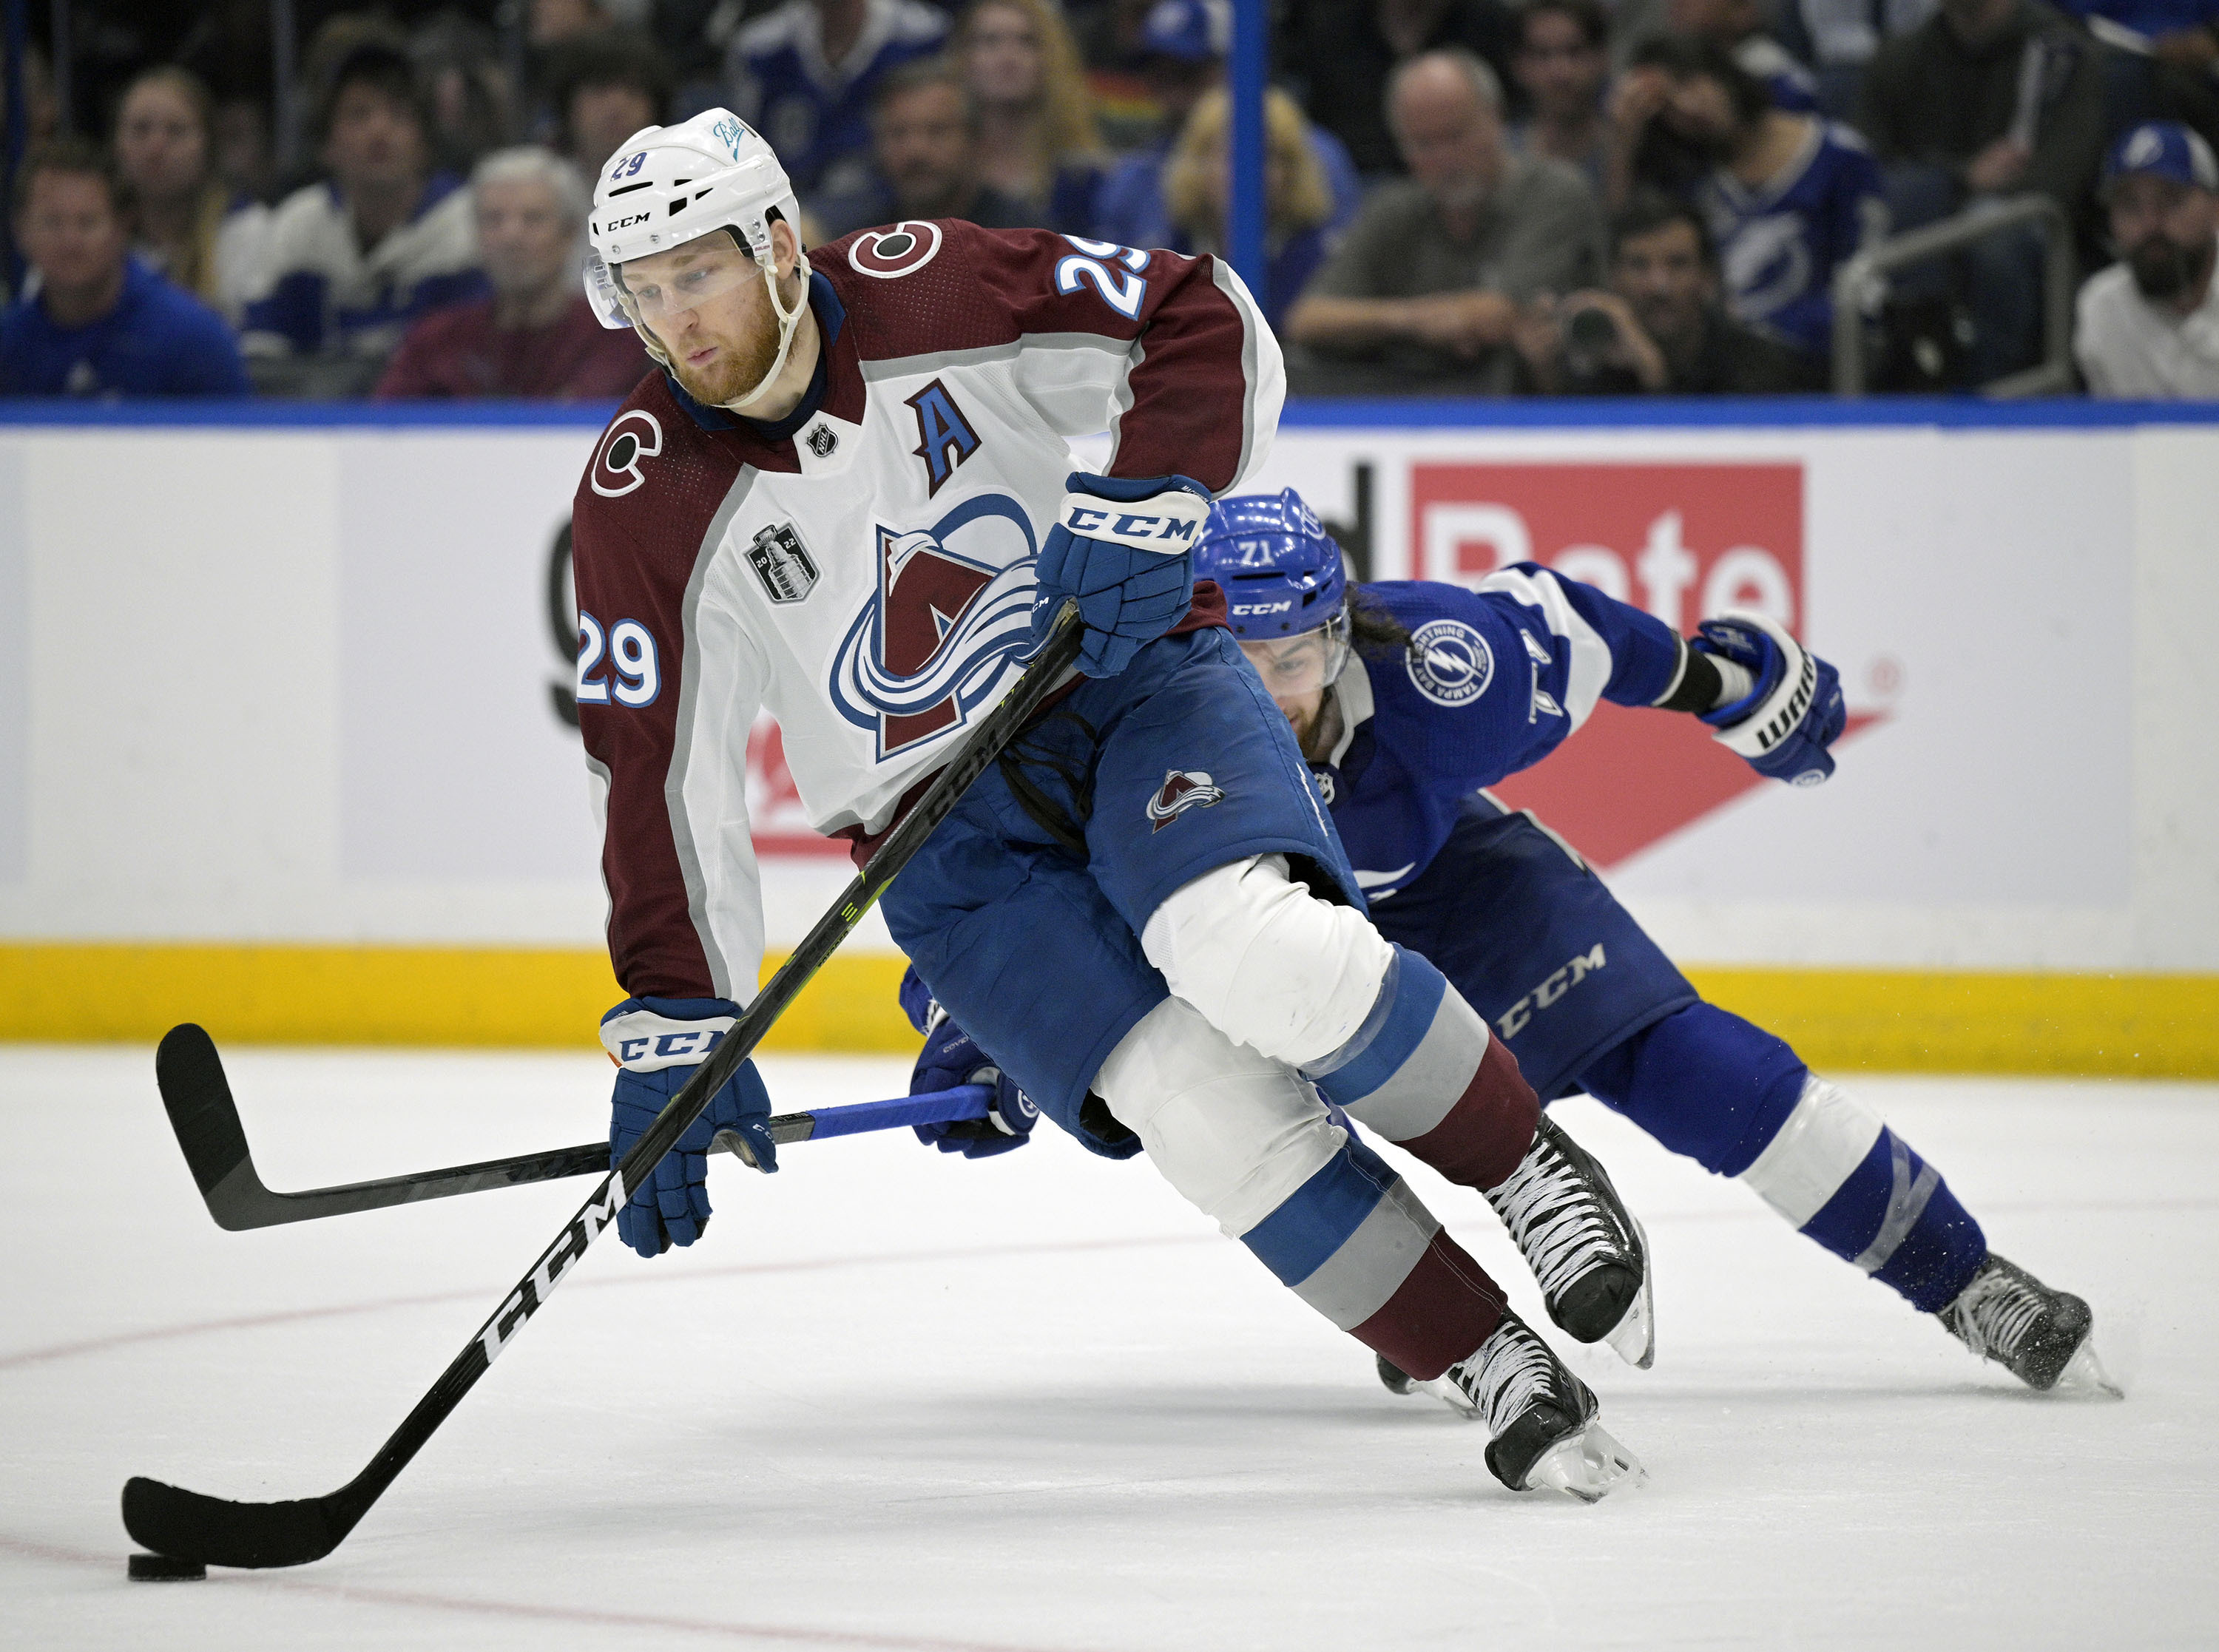 MacKinnon's heroics lead Avalanche to Central Division title